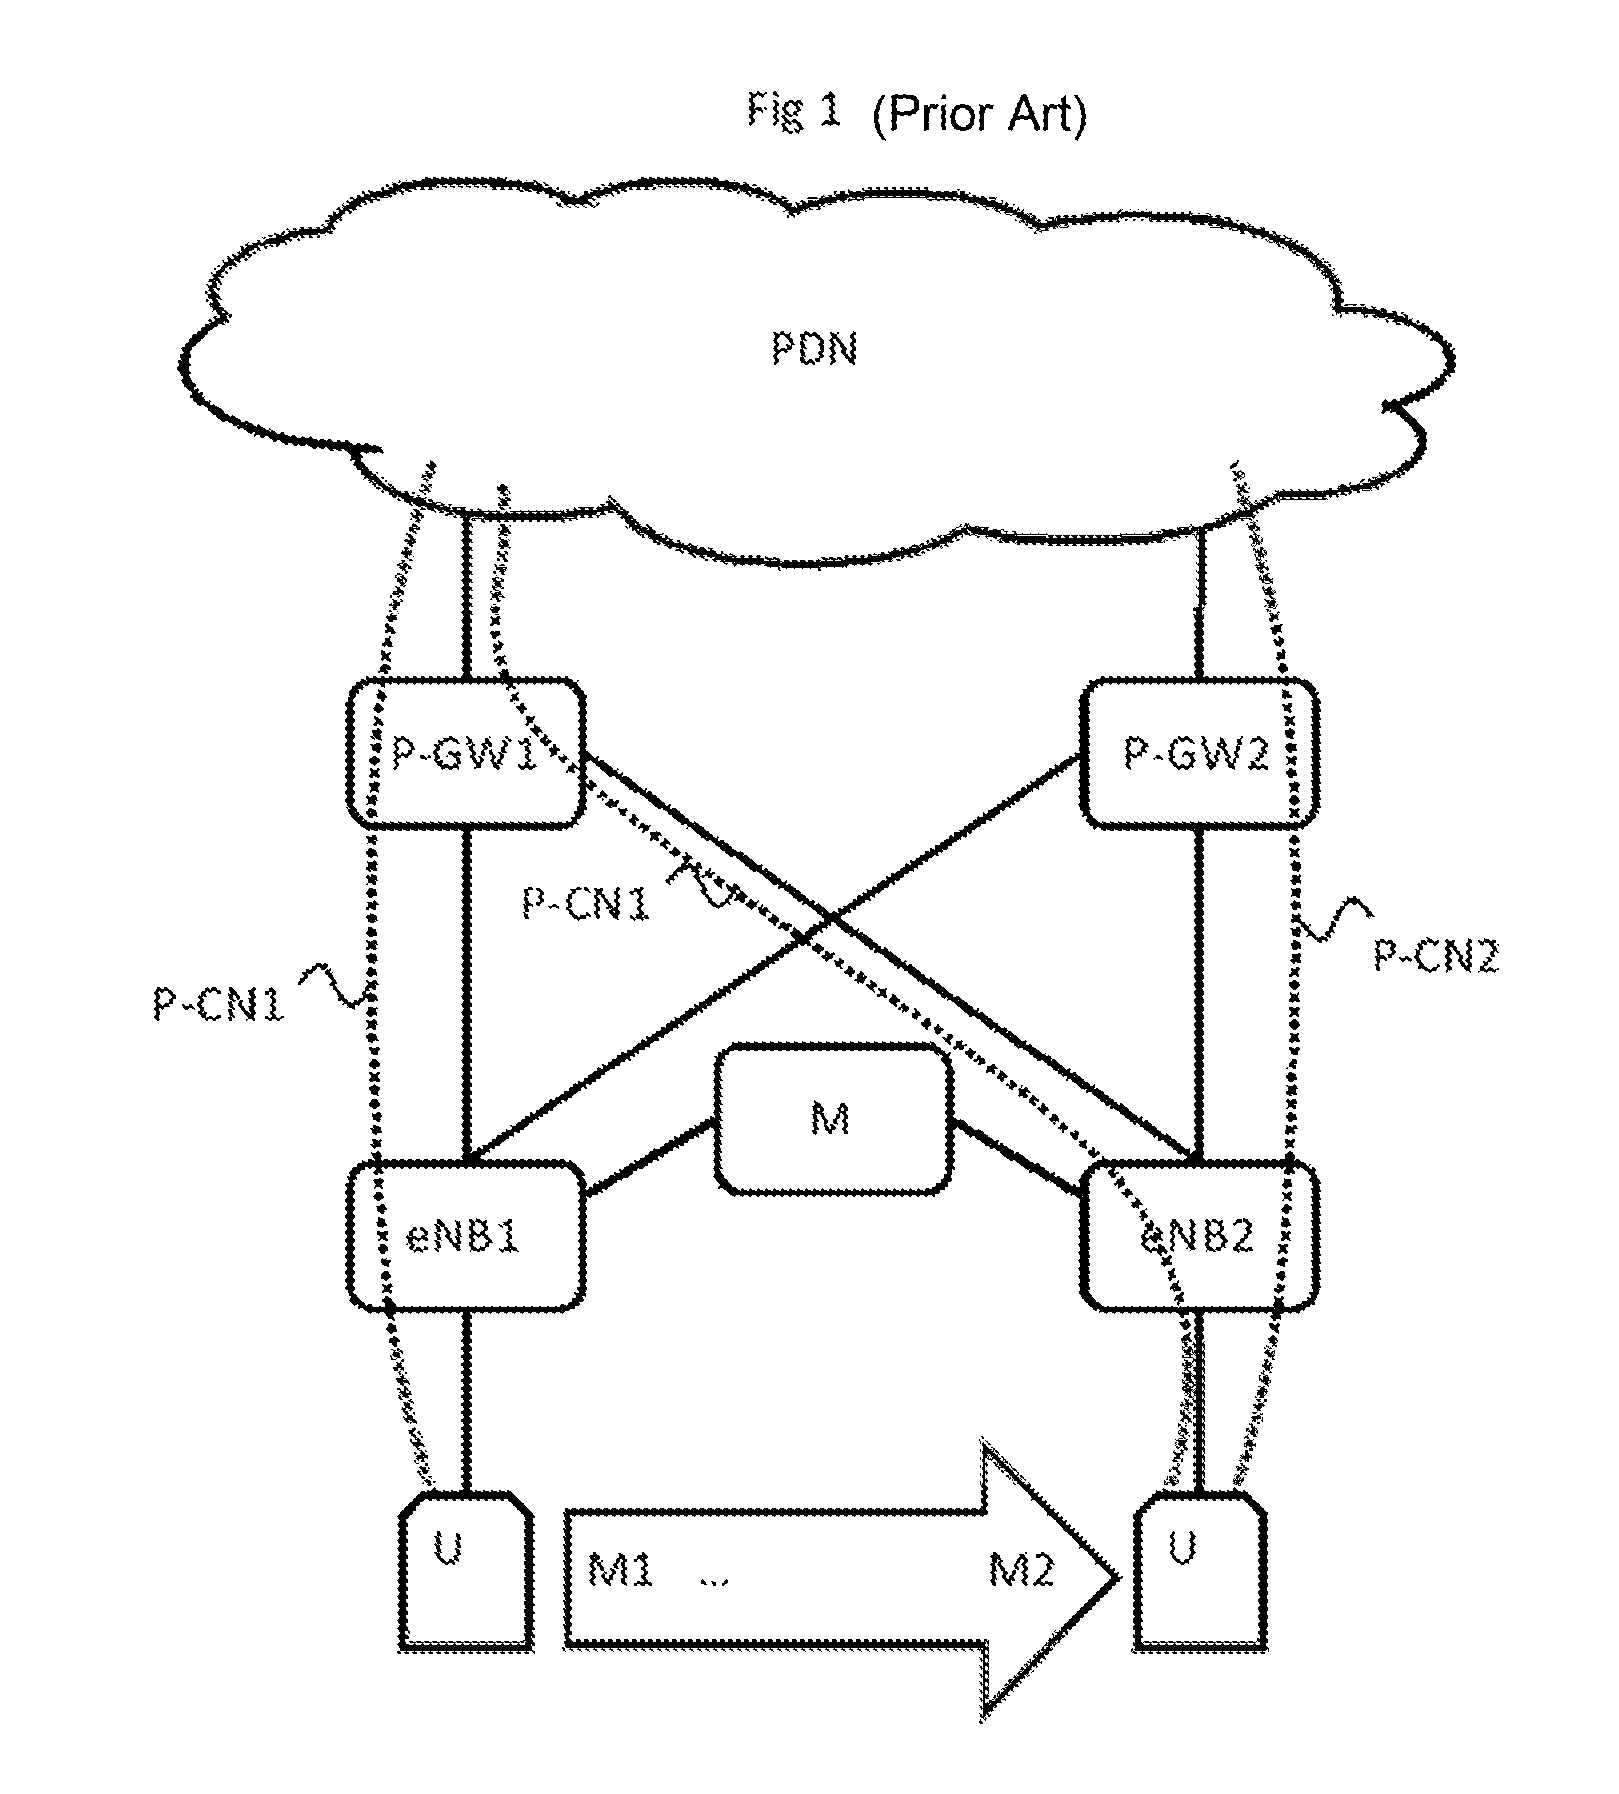 Mechanism for managing PDN connections in LTE/EPC networks